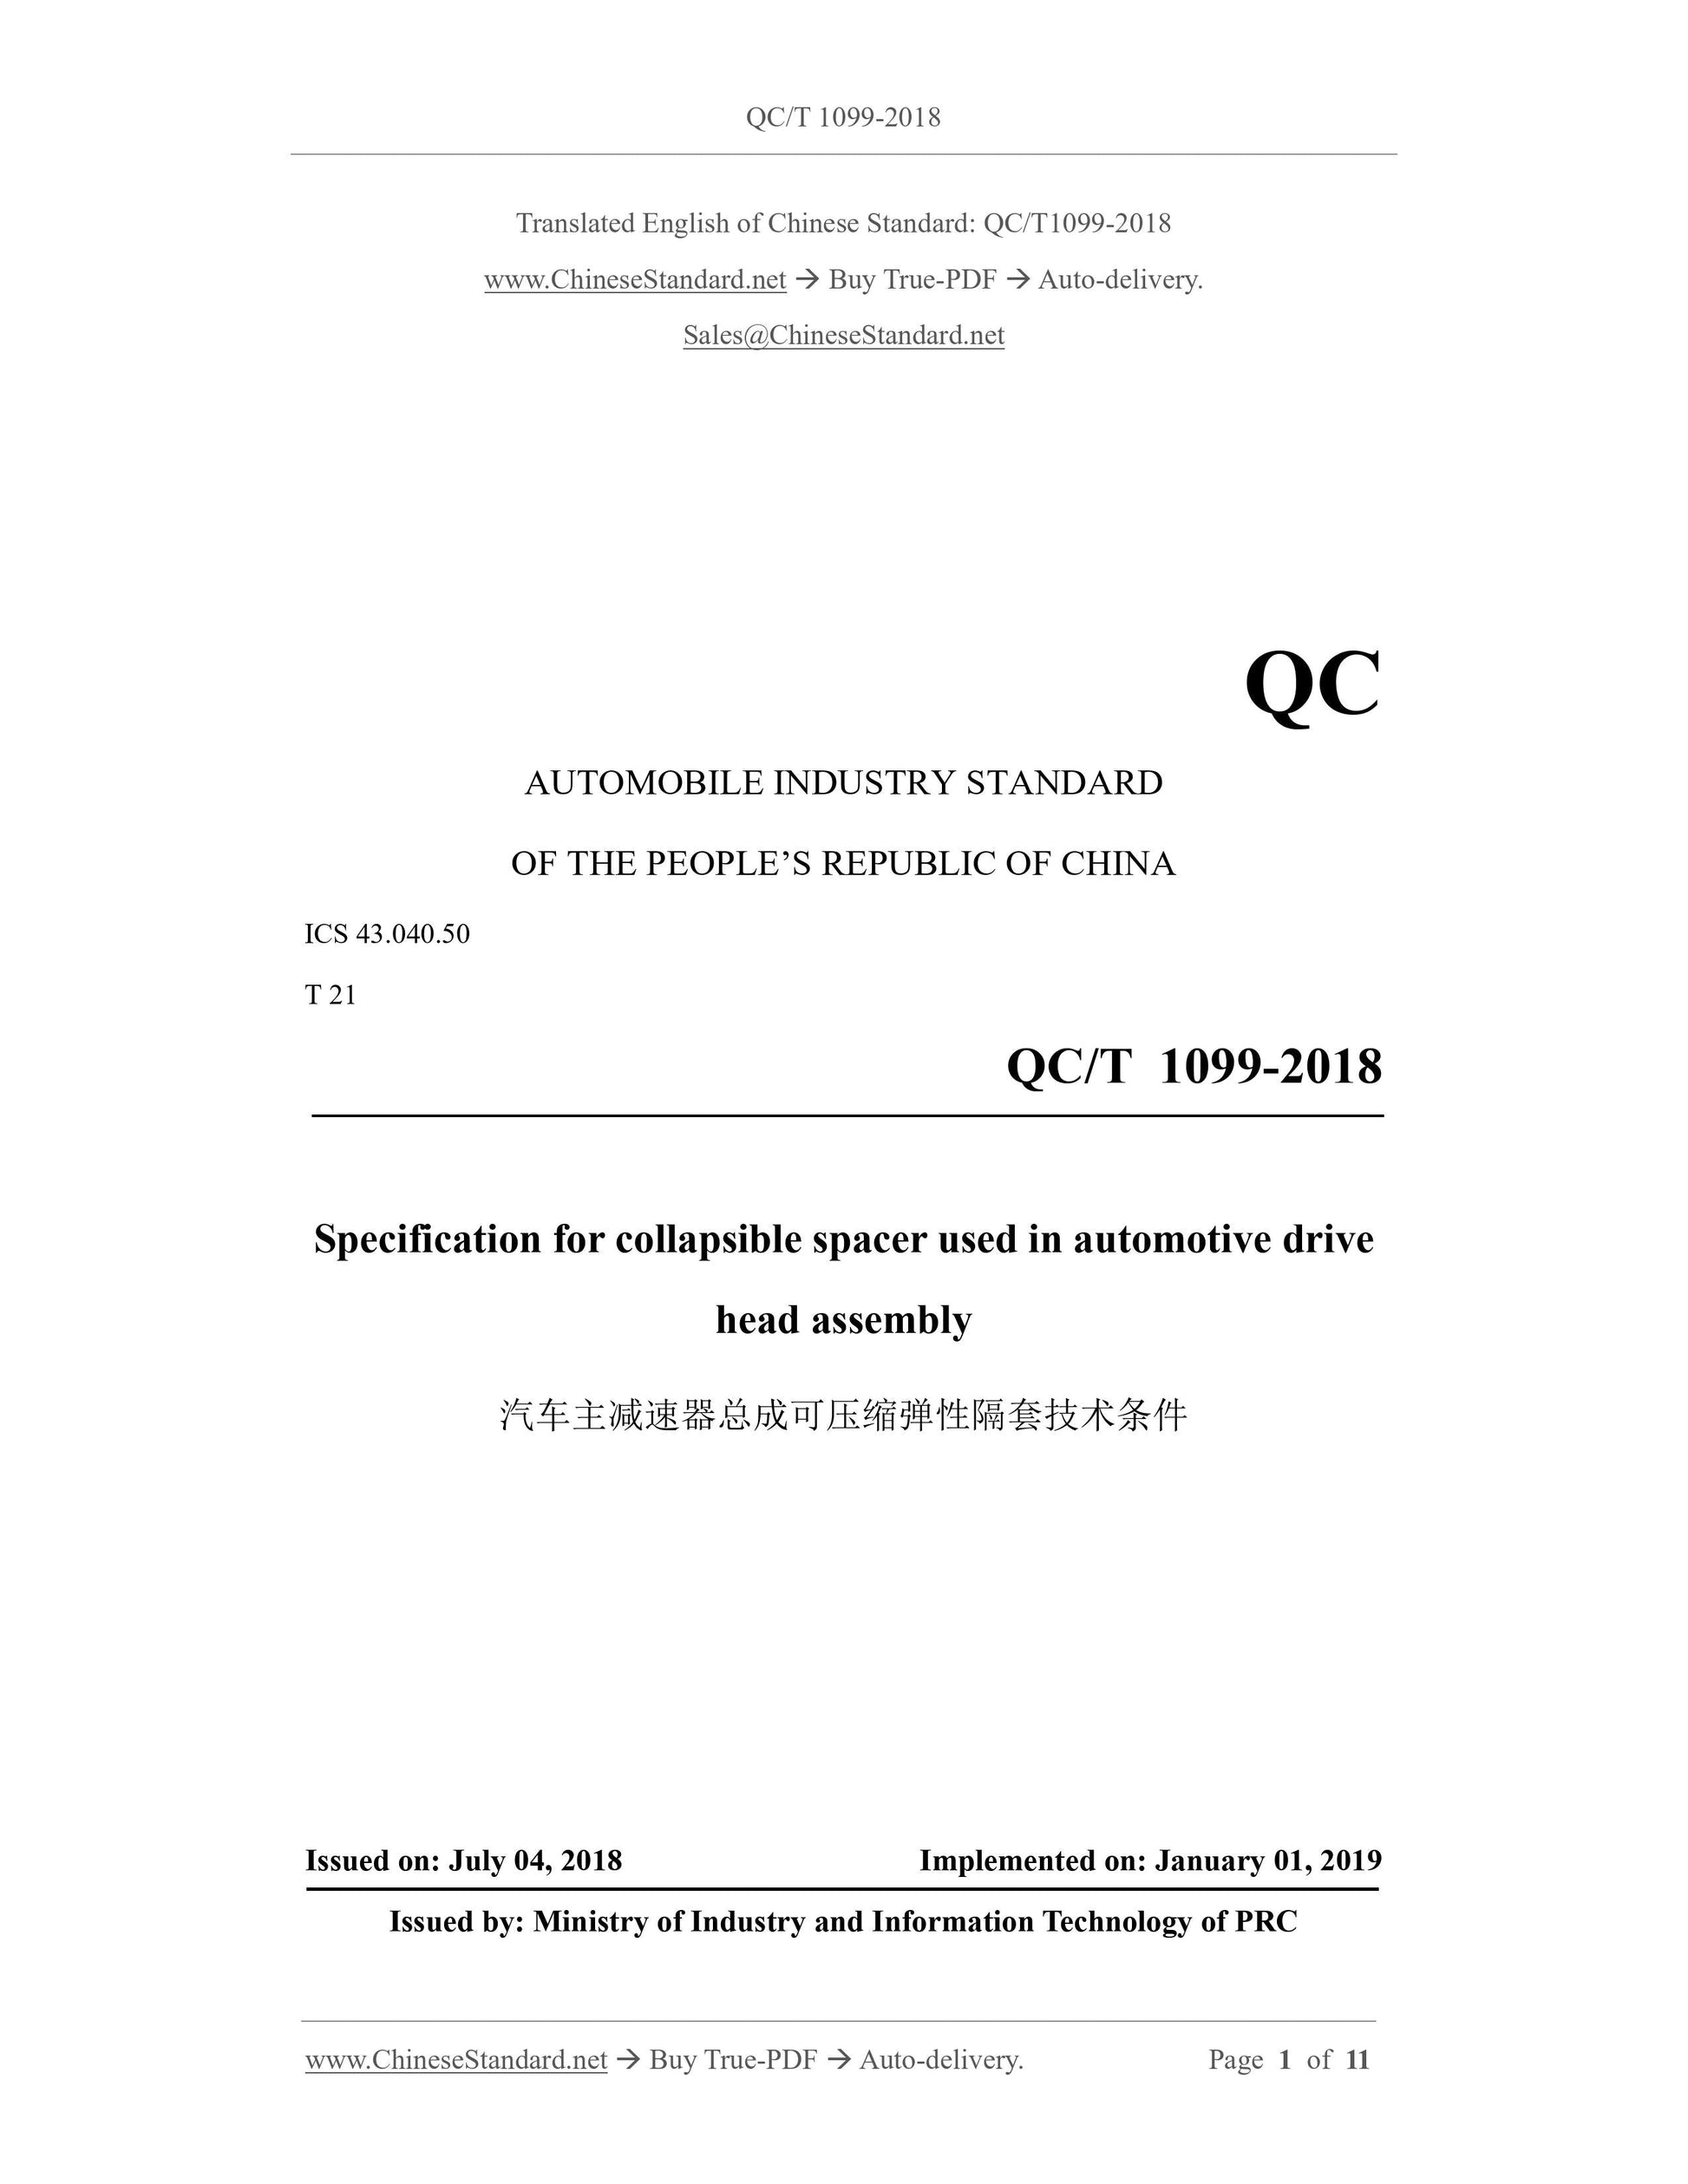 QC/T 1099-2018 Page 1